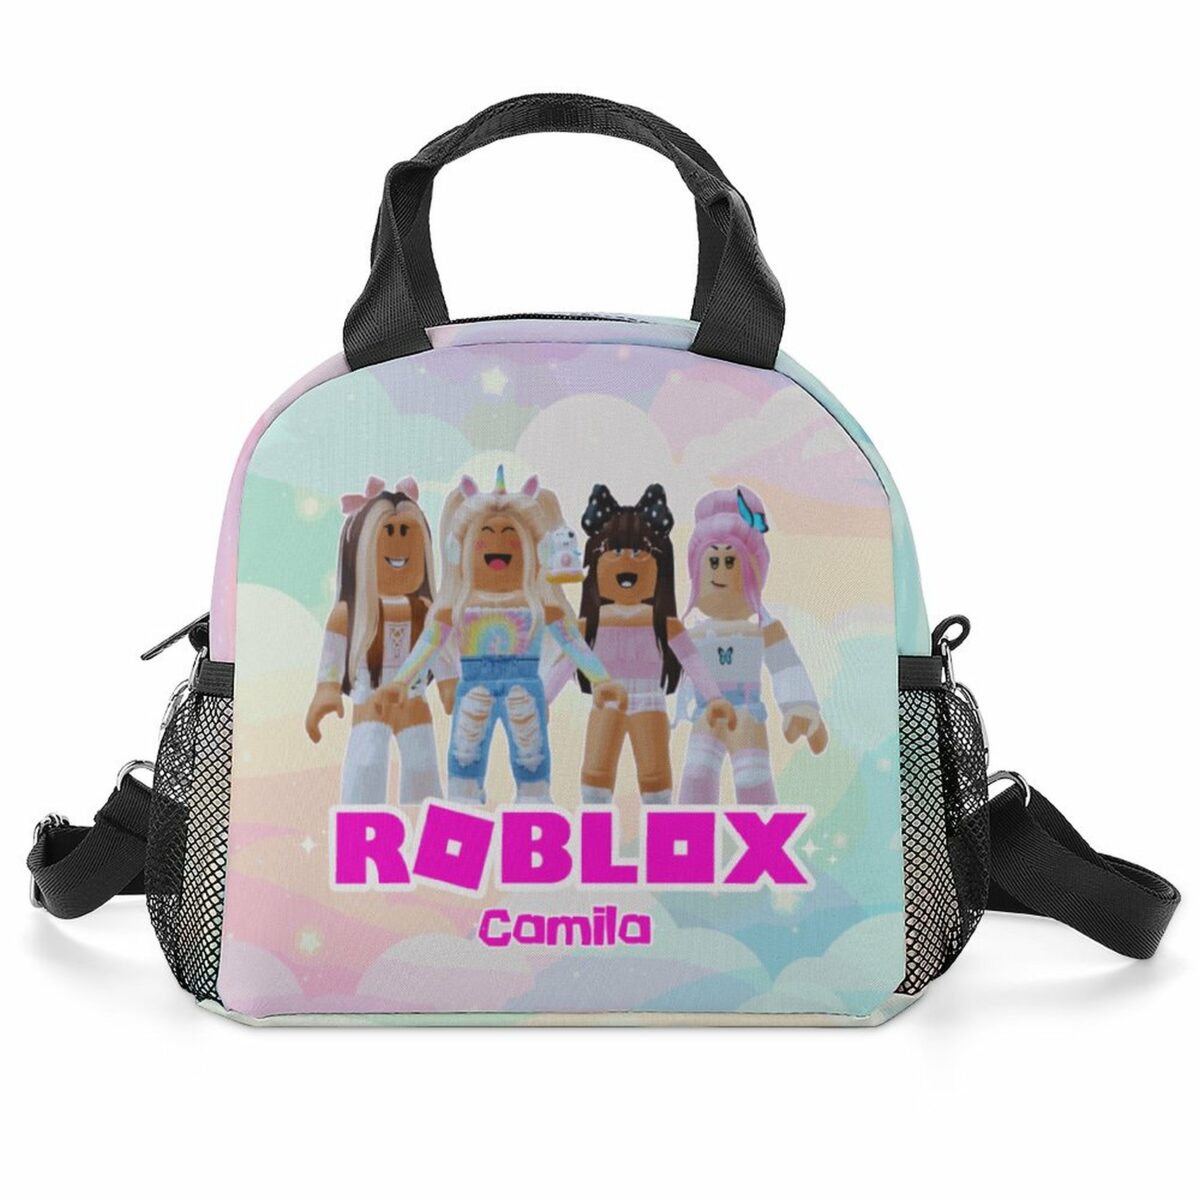 Customizable Name Roblox Girls Insulated Lunch Crossbody Bag with Strap for School, Beach, Picnic Cool Kiddo 10